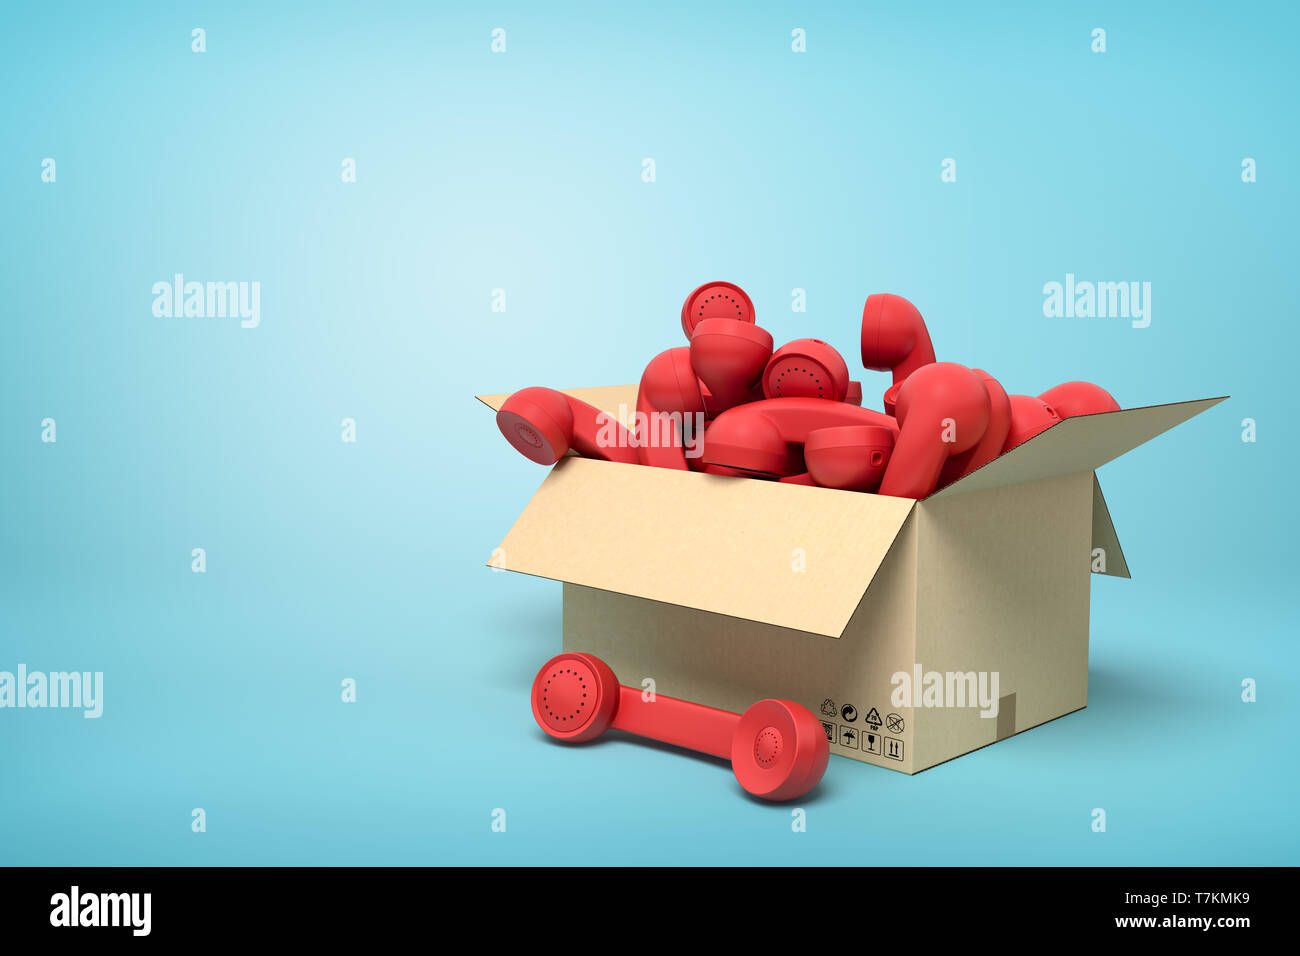 3d rendering of cardboard box full of red landline phone receivers on blue background. Stock Photo